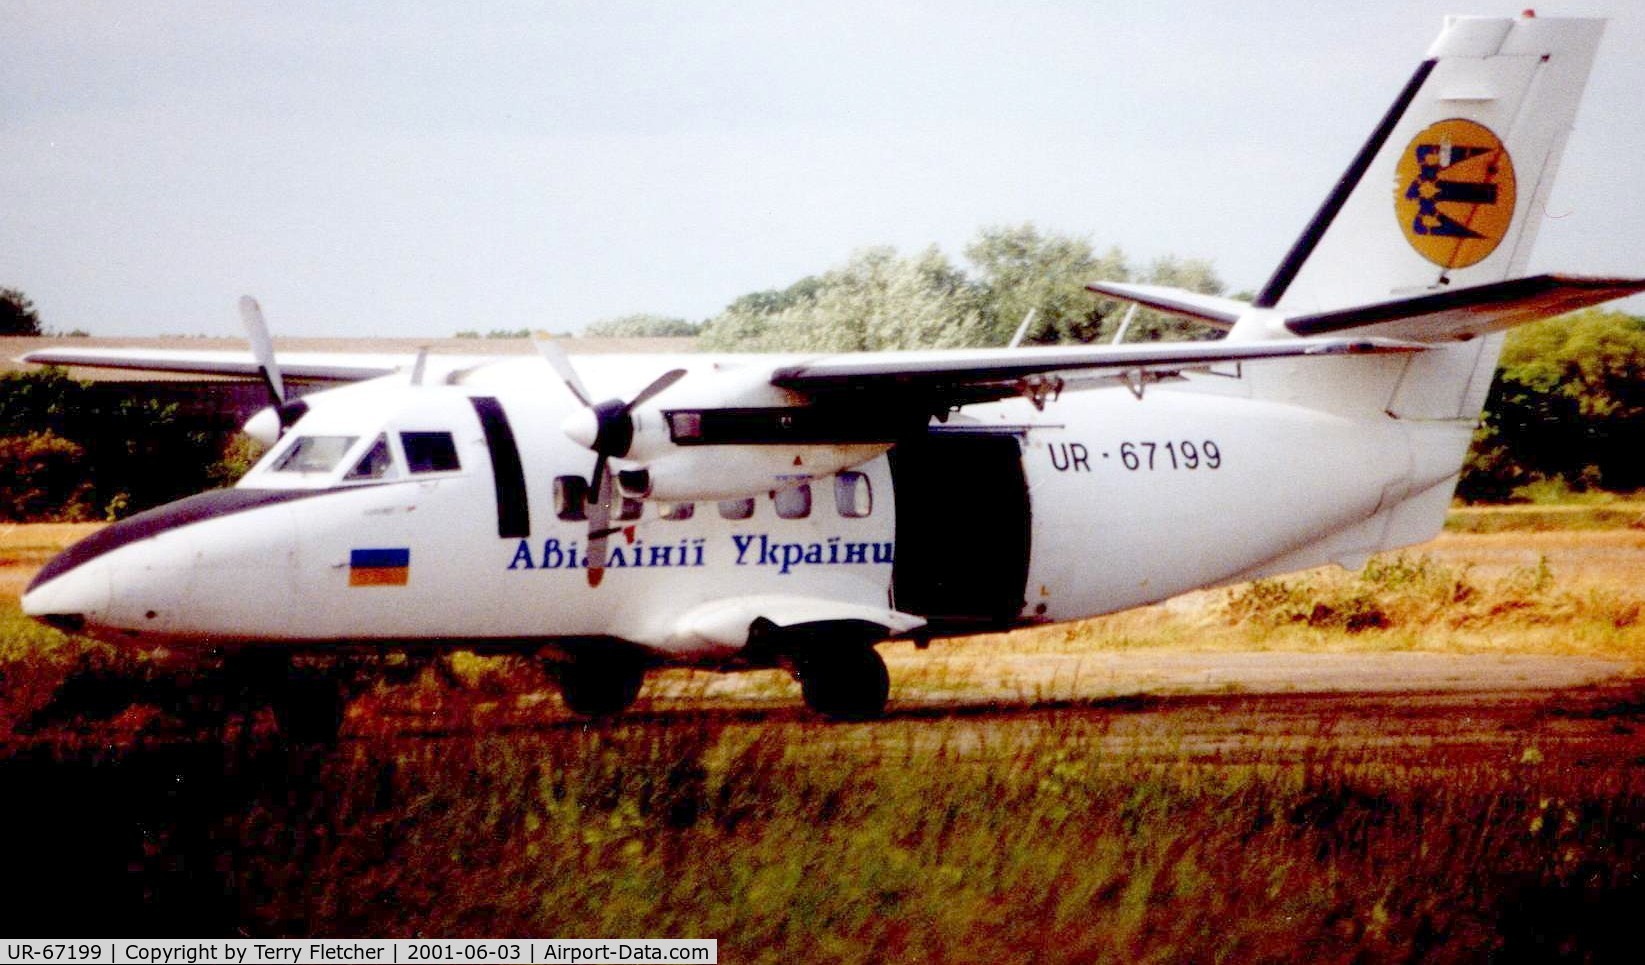 UR-67199, 1979 Let L-410UVP Turbolet C/N 790305, Seen here in 2001 when the aircraft was based at Langar Airport as a jumping platform for the skydivers